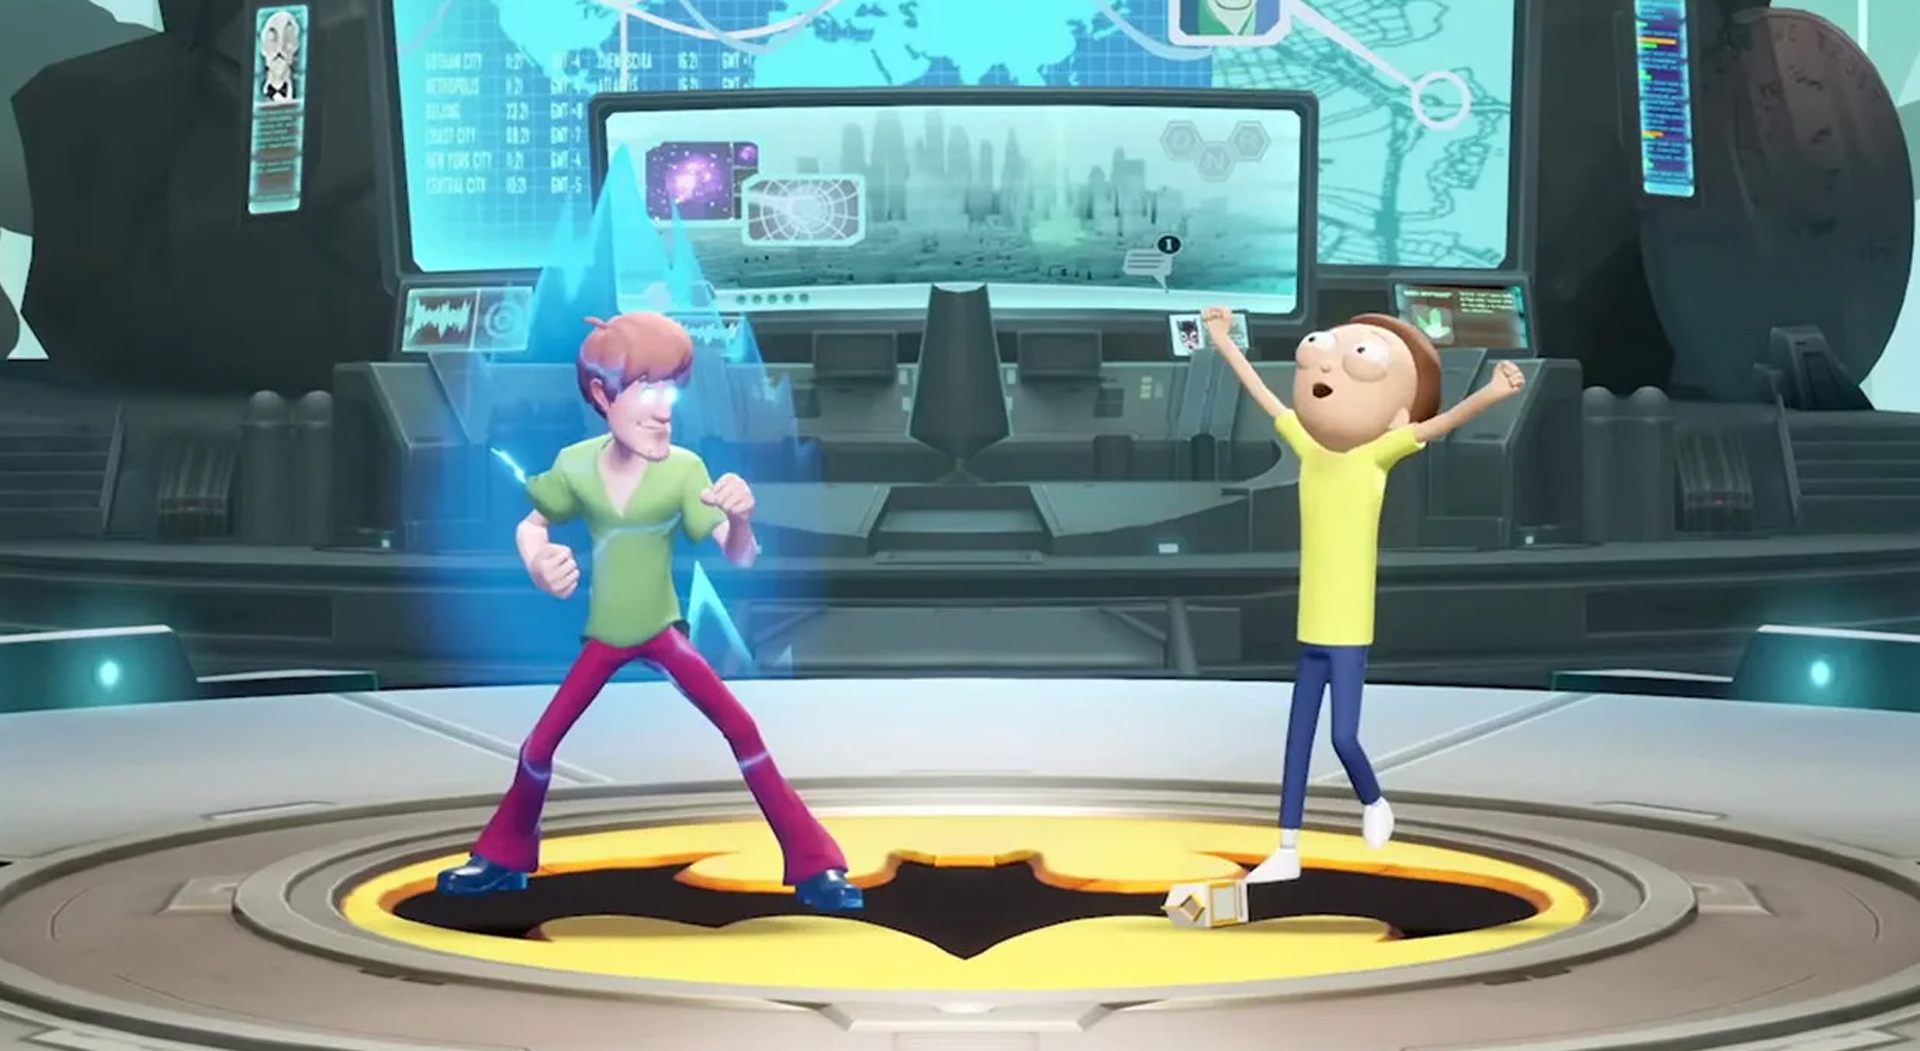 Multiversus Morty gameplay trailer released